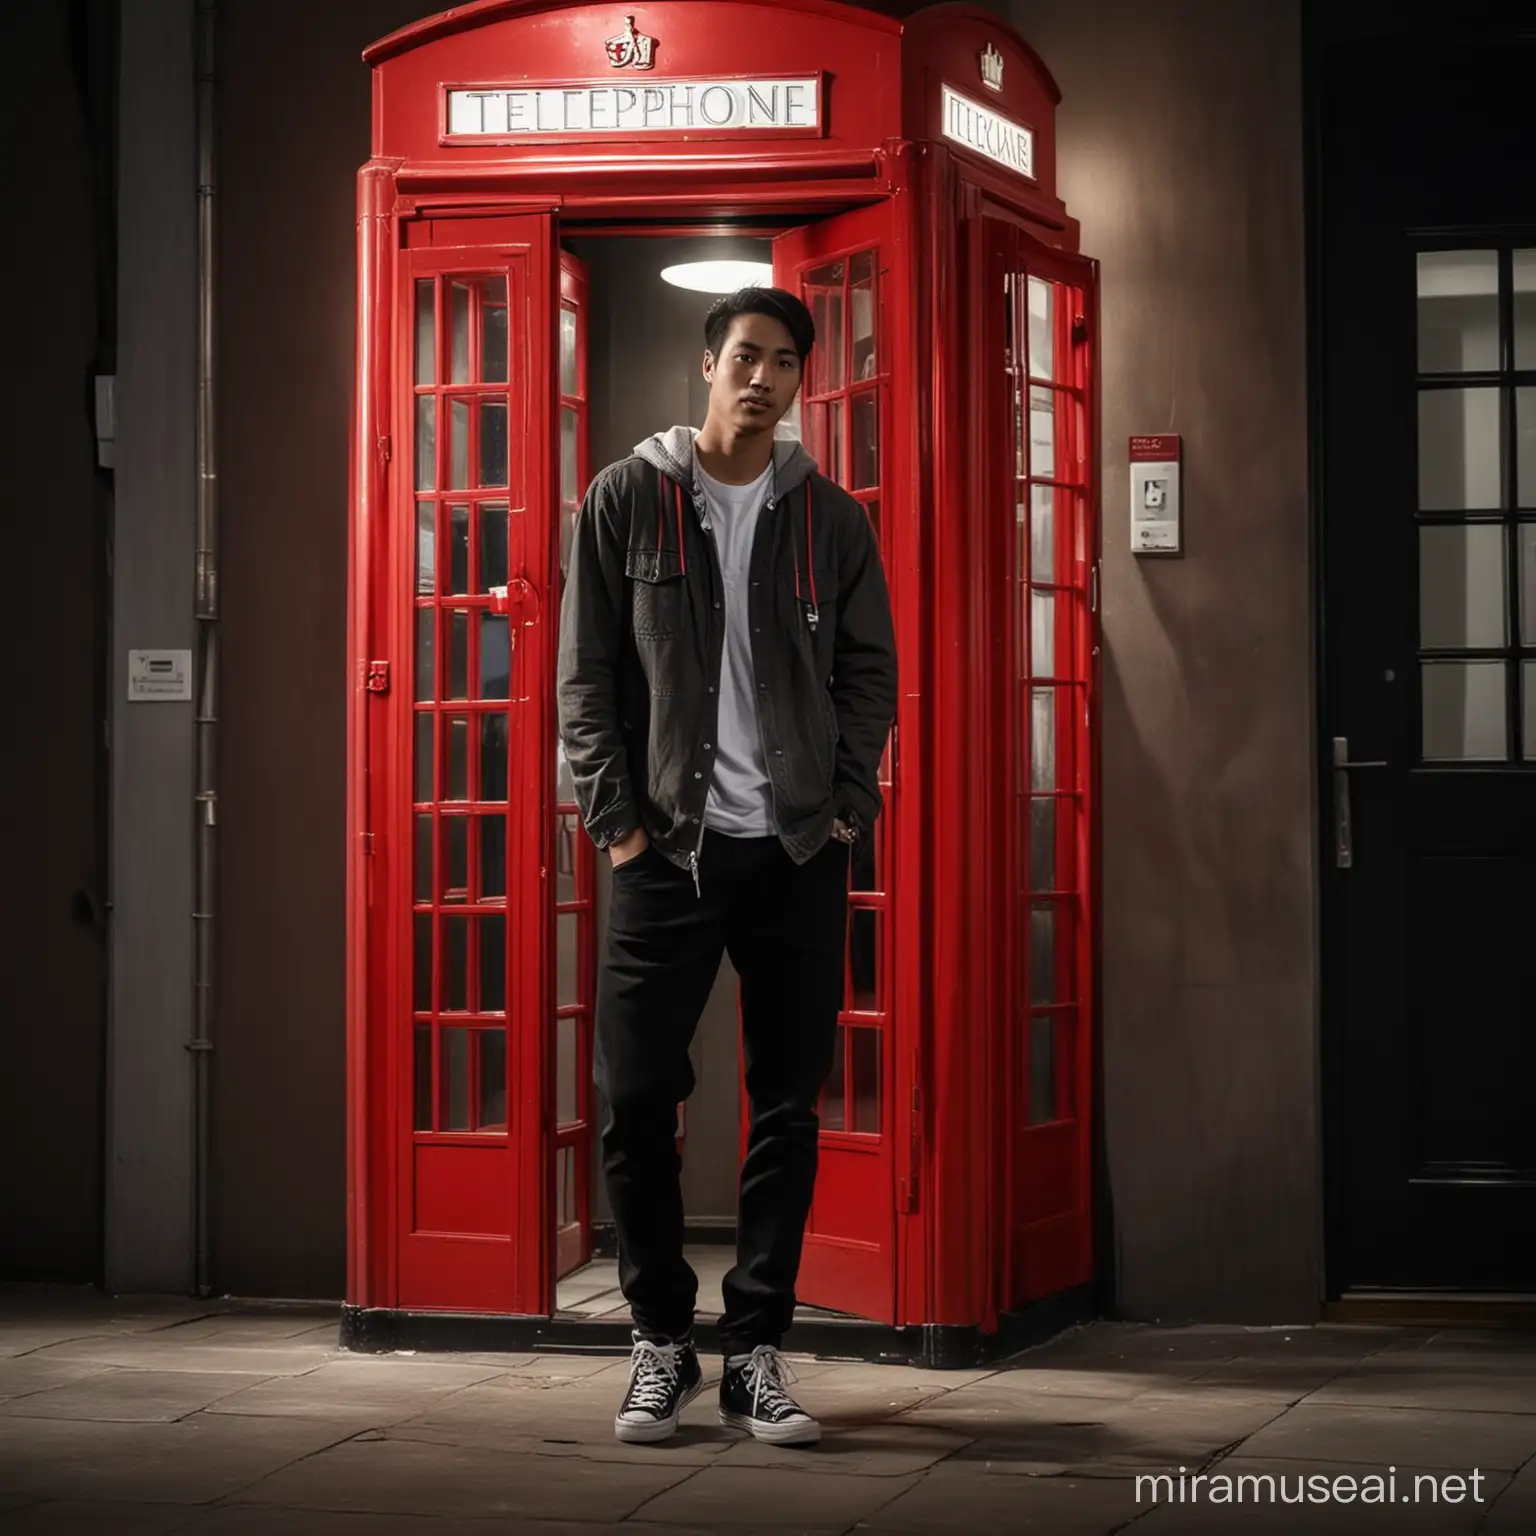 full body, a Indonesian man with short side parted hair wearing casual clothes,black jeans,sneakers shoes,standing Stiffly behind the glass door of a red telephone box, daydreaming with the telephone receiver to his ear, dark background with soft light bias from the side, best angel, dark night atmosphere, cinematic images, profesional photo shoots, promotional images, face looking at the camera